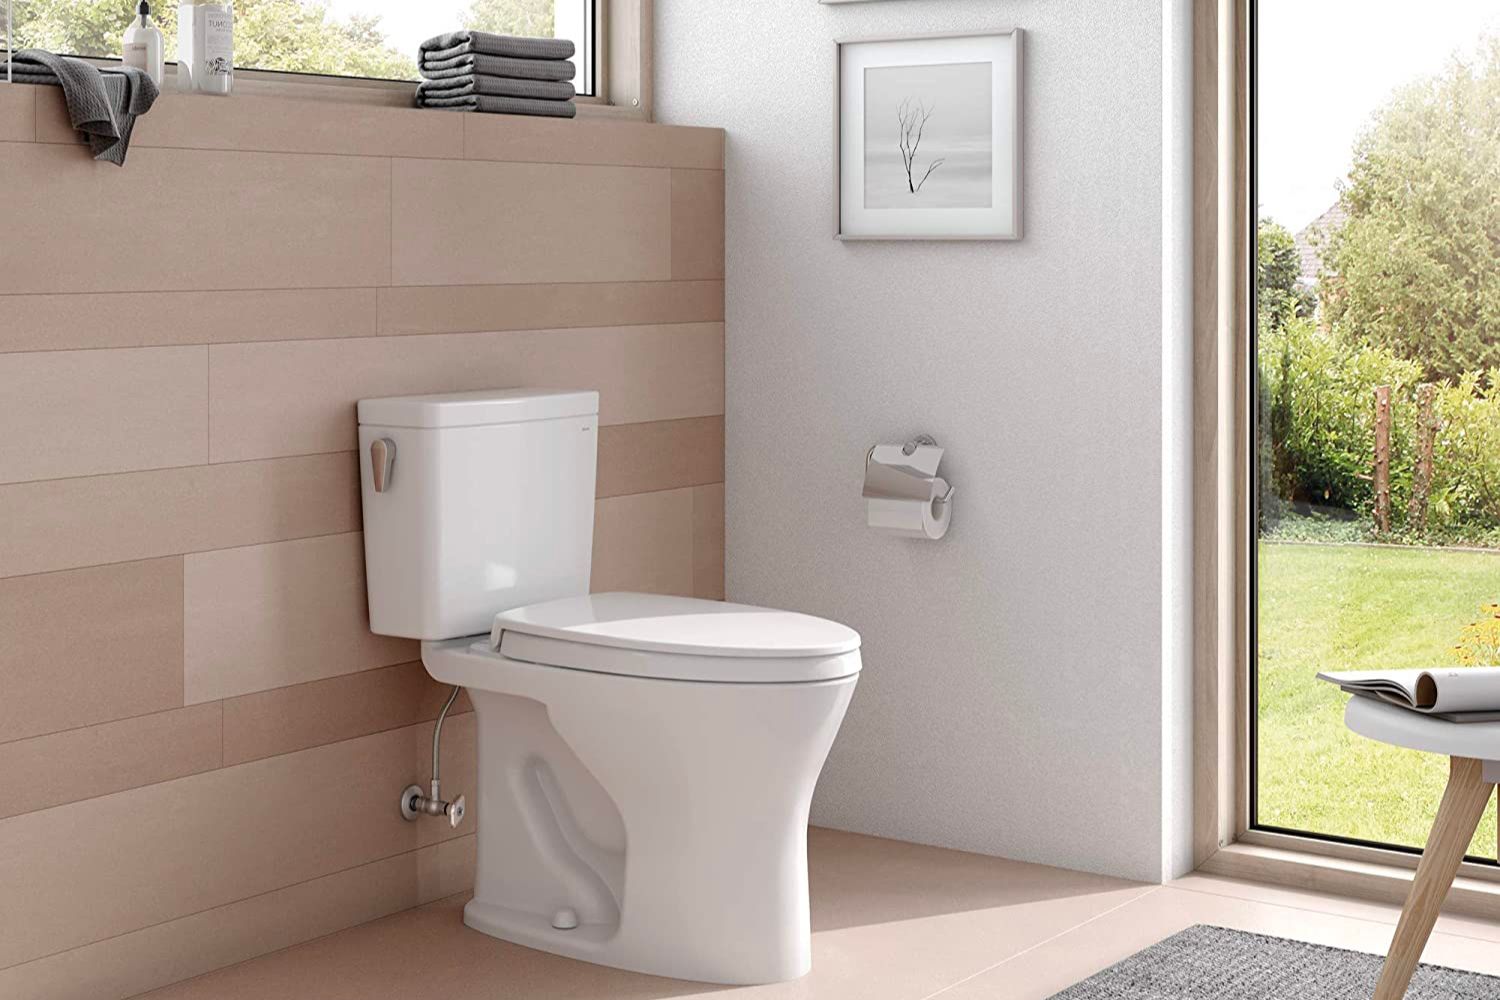 The Best Toto Toilet Option in a bright and minimalist bathroom